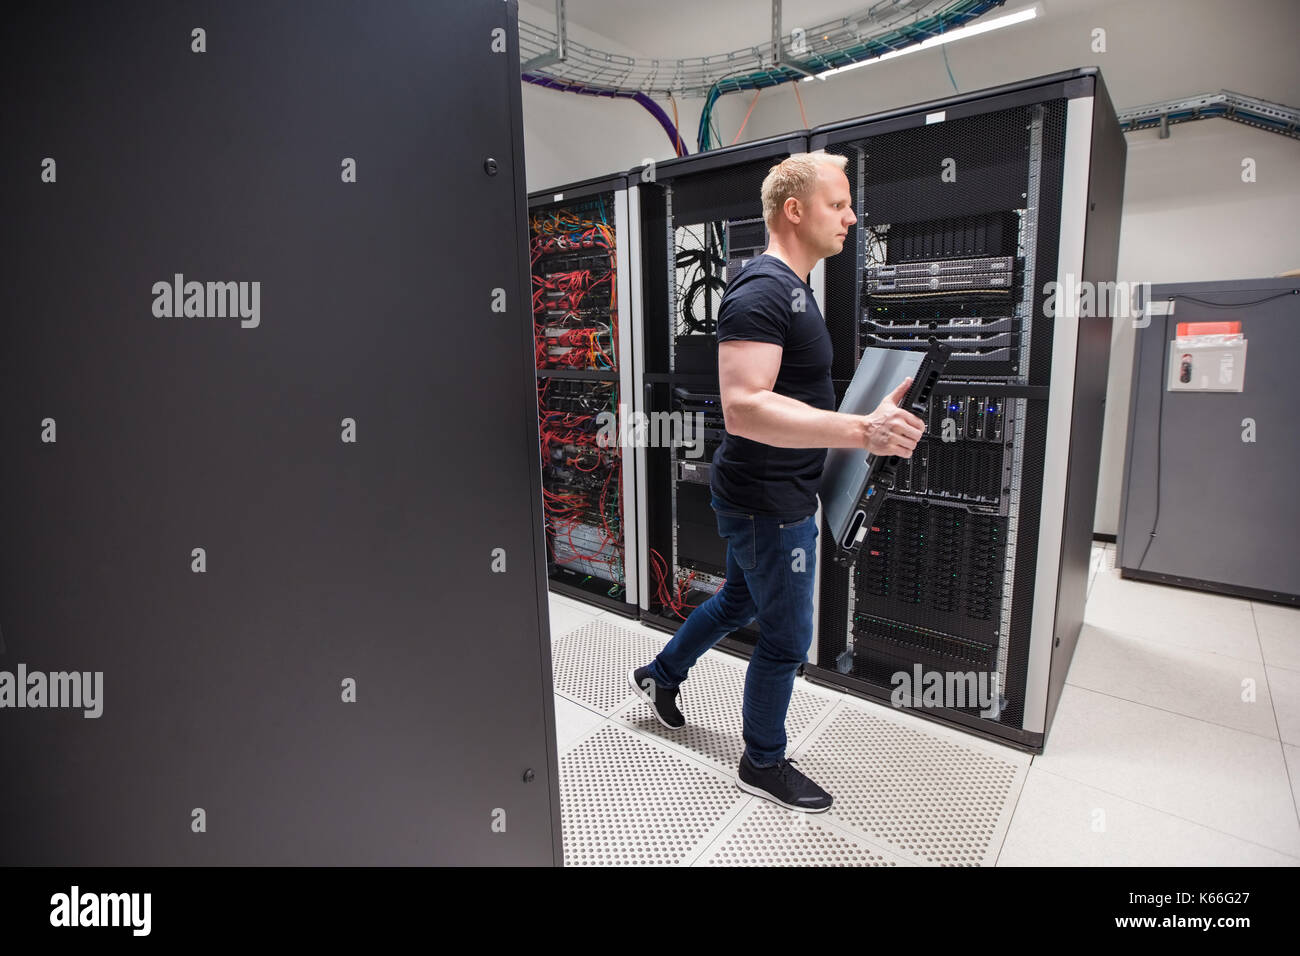 Male Technician Carrying Blade Server While Walking In Datacente Stock Photo